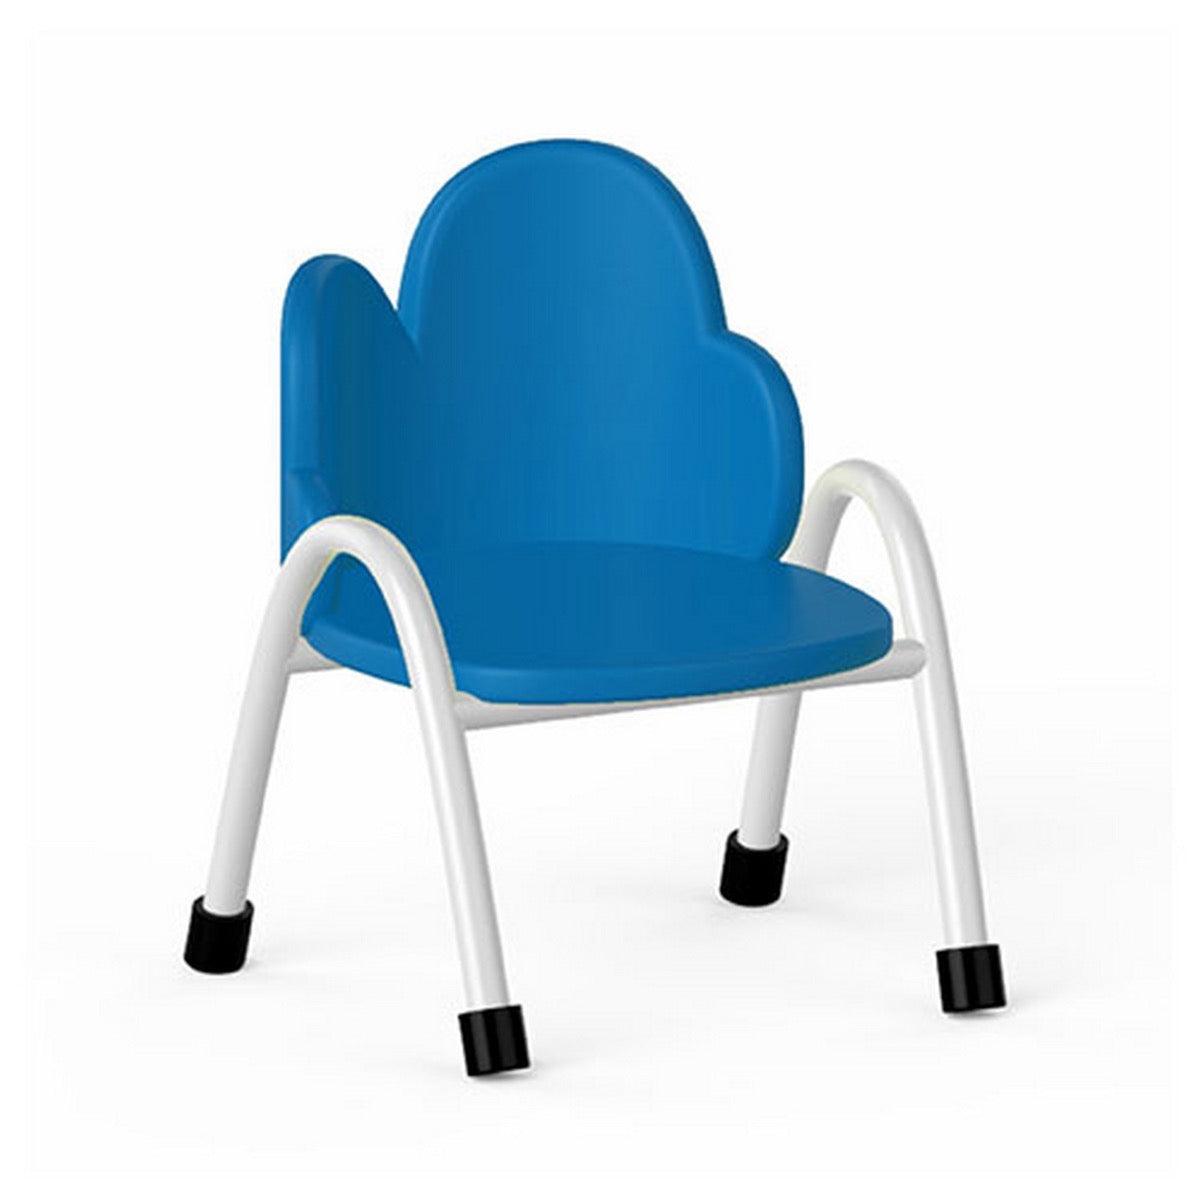 Ok Play Cloud Chair, Study Chair, Sturdy And Durable Chair, Plastic Chair, Perfect For Home, Creches And School, Blue, 5 to 10 Years, Height 10 Inches